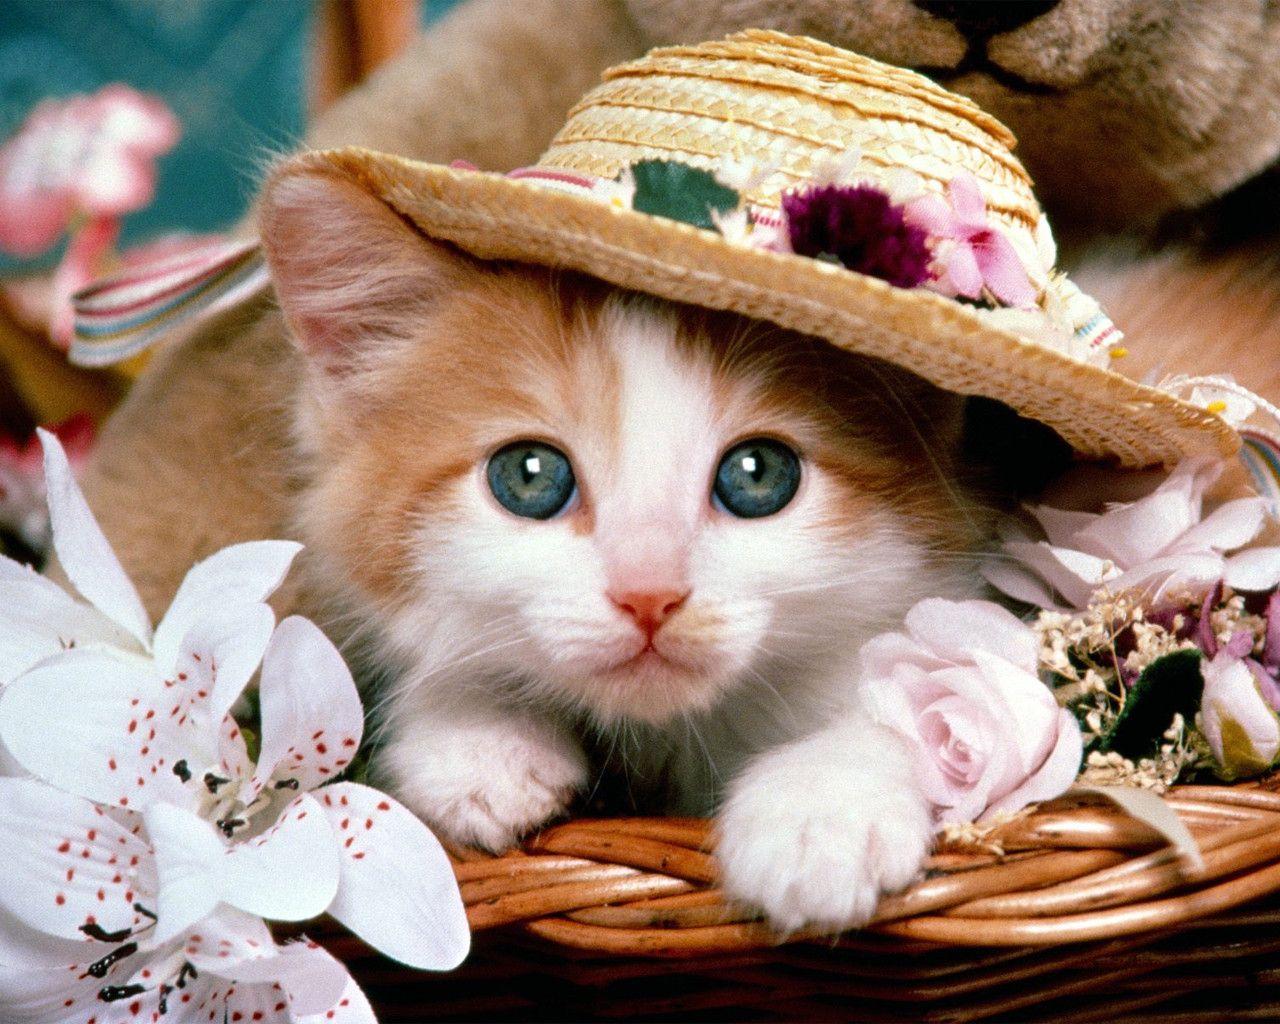 Baby Kitty Wallpaper Image & Picture